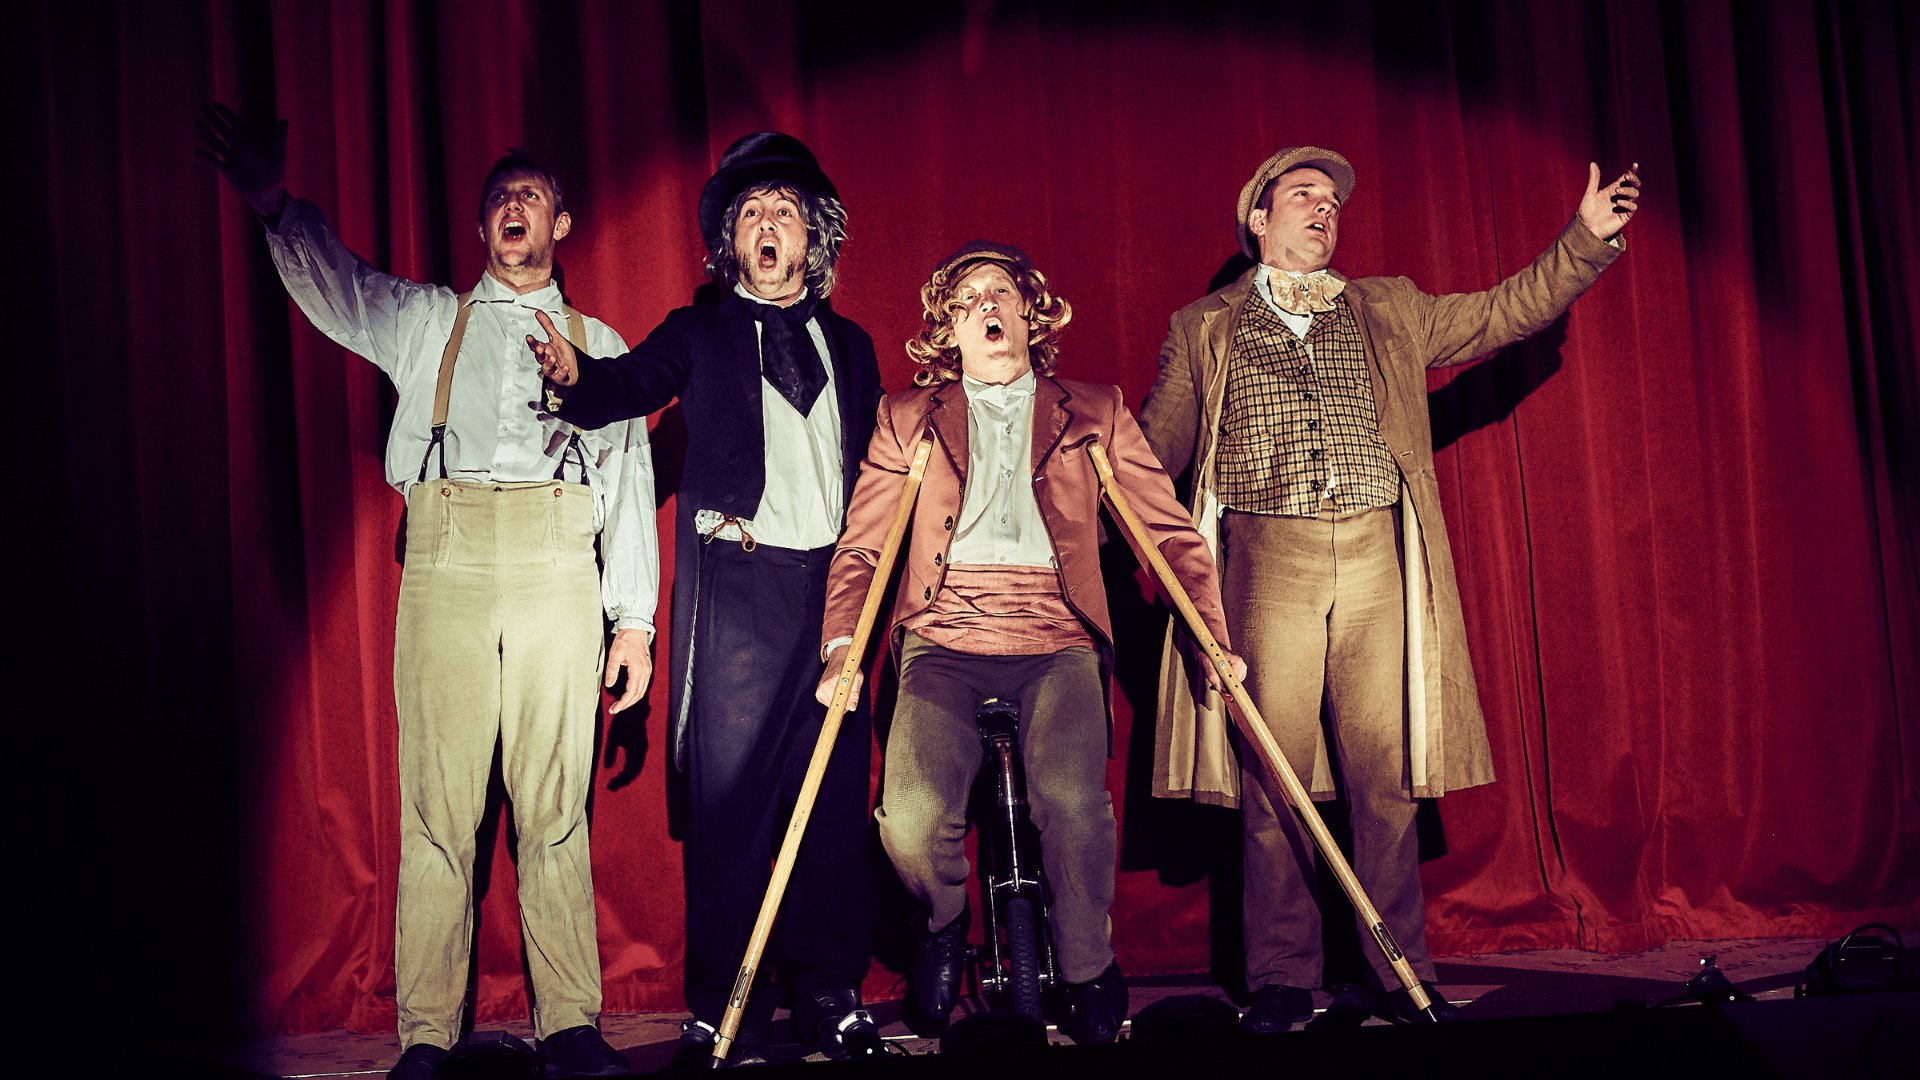 A Christmas Carol production shot: 4 character stood in front of the curtain singing. 1 character is on crutches.